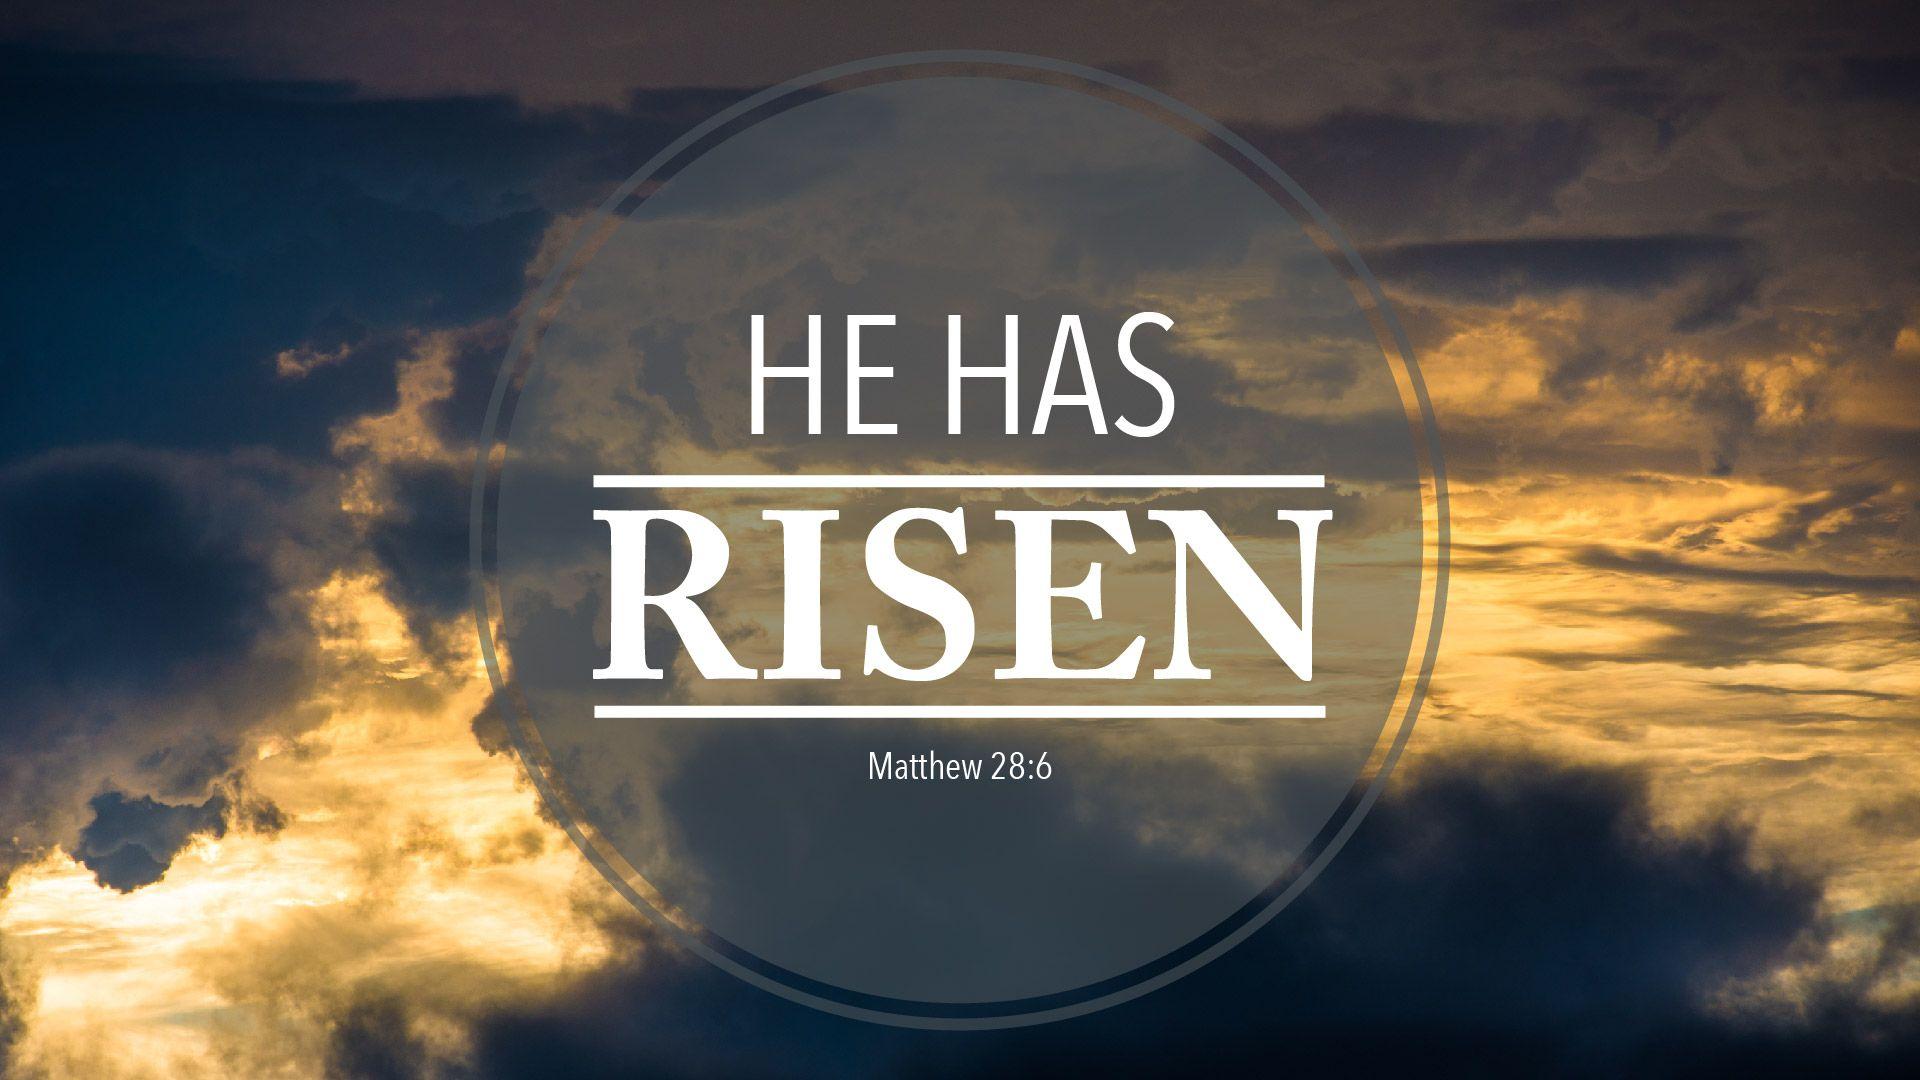 1100 He Is Risen Stock Photos Pictures  RoyaltyFree Images  iStock   He is risen easter Happy easter he is risen Easter he is risen